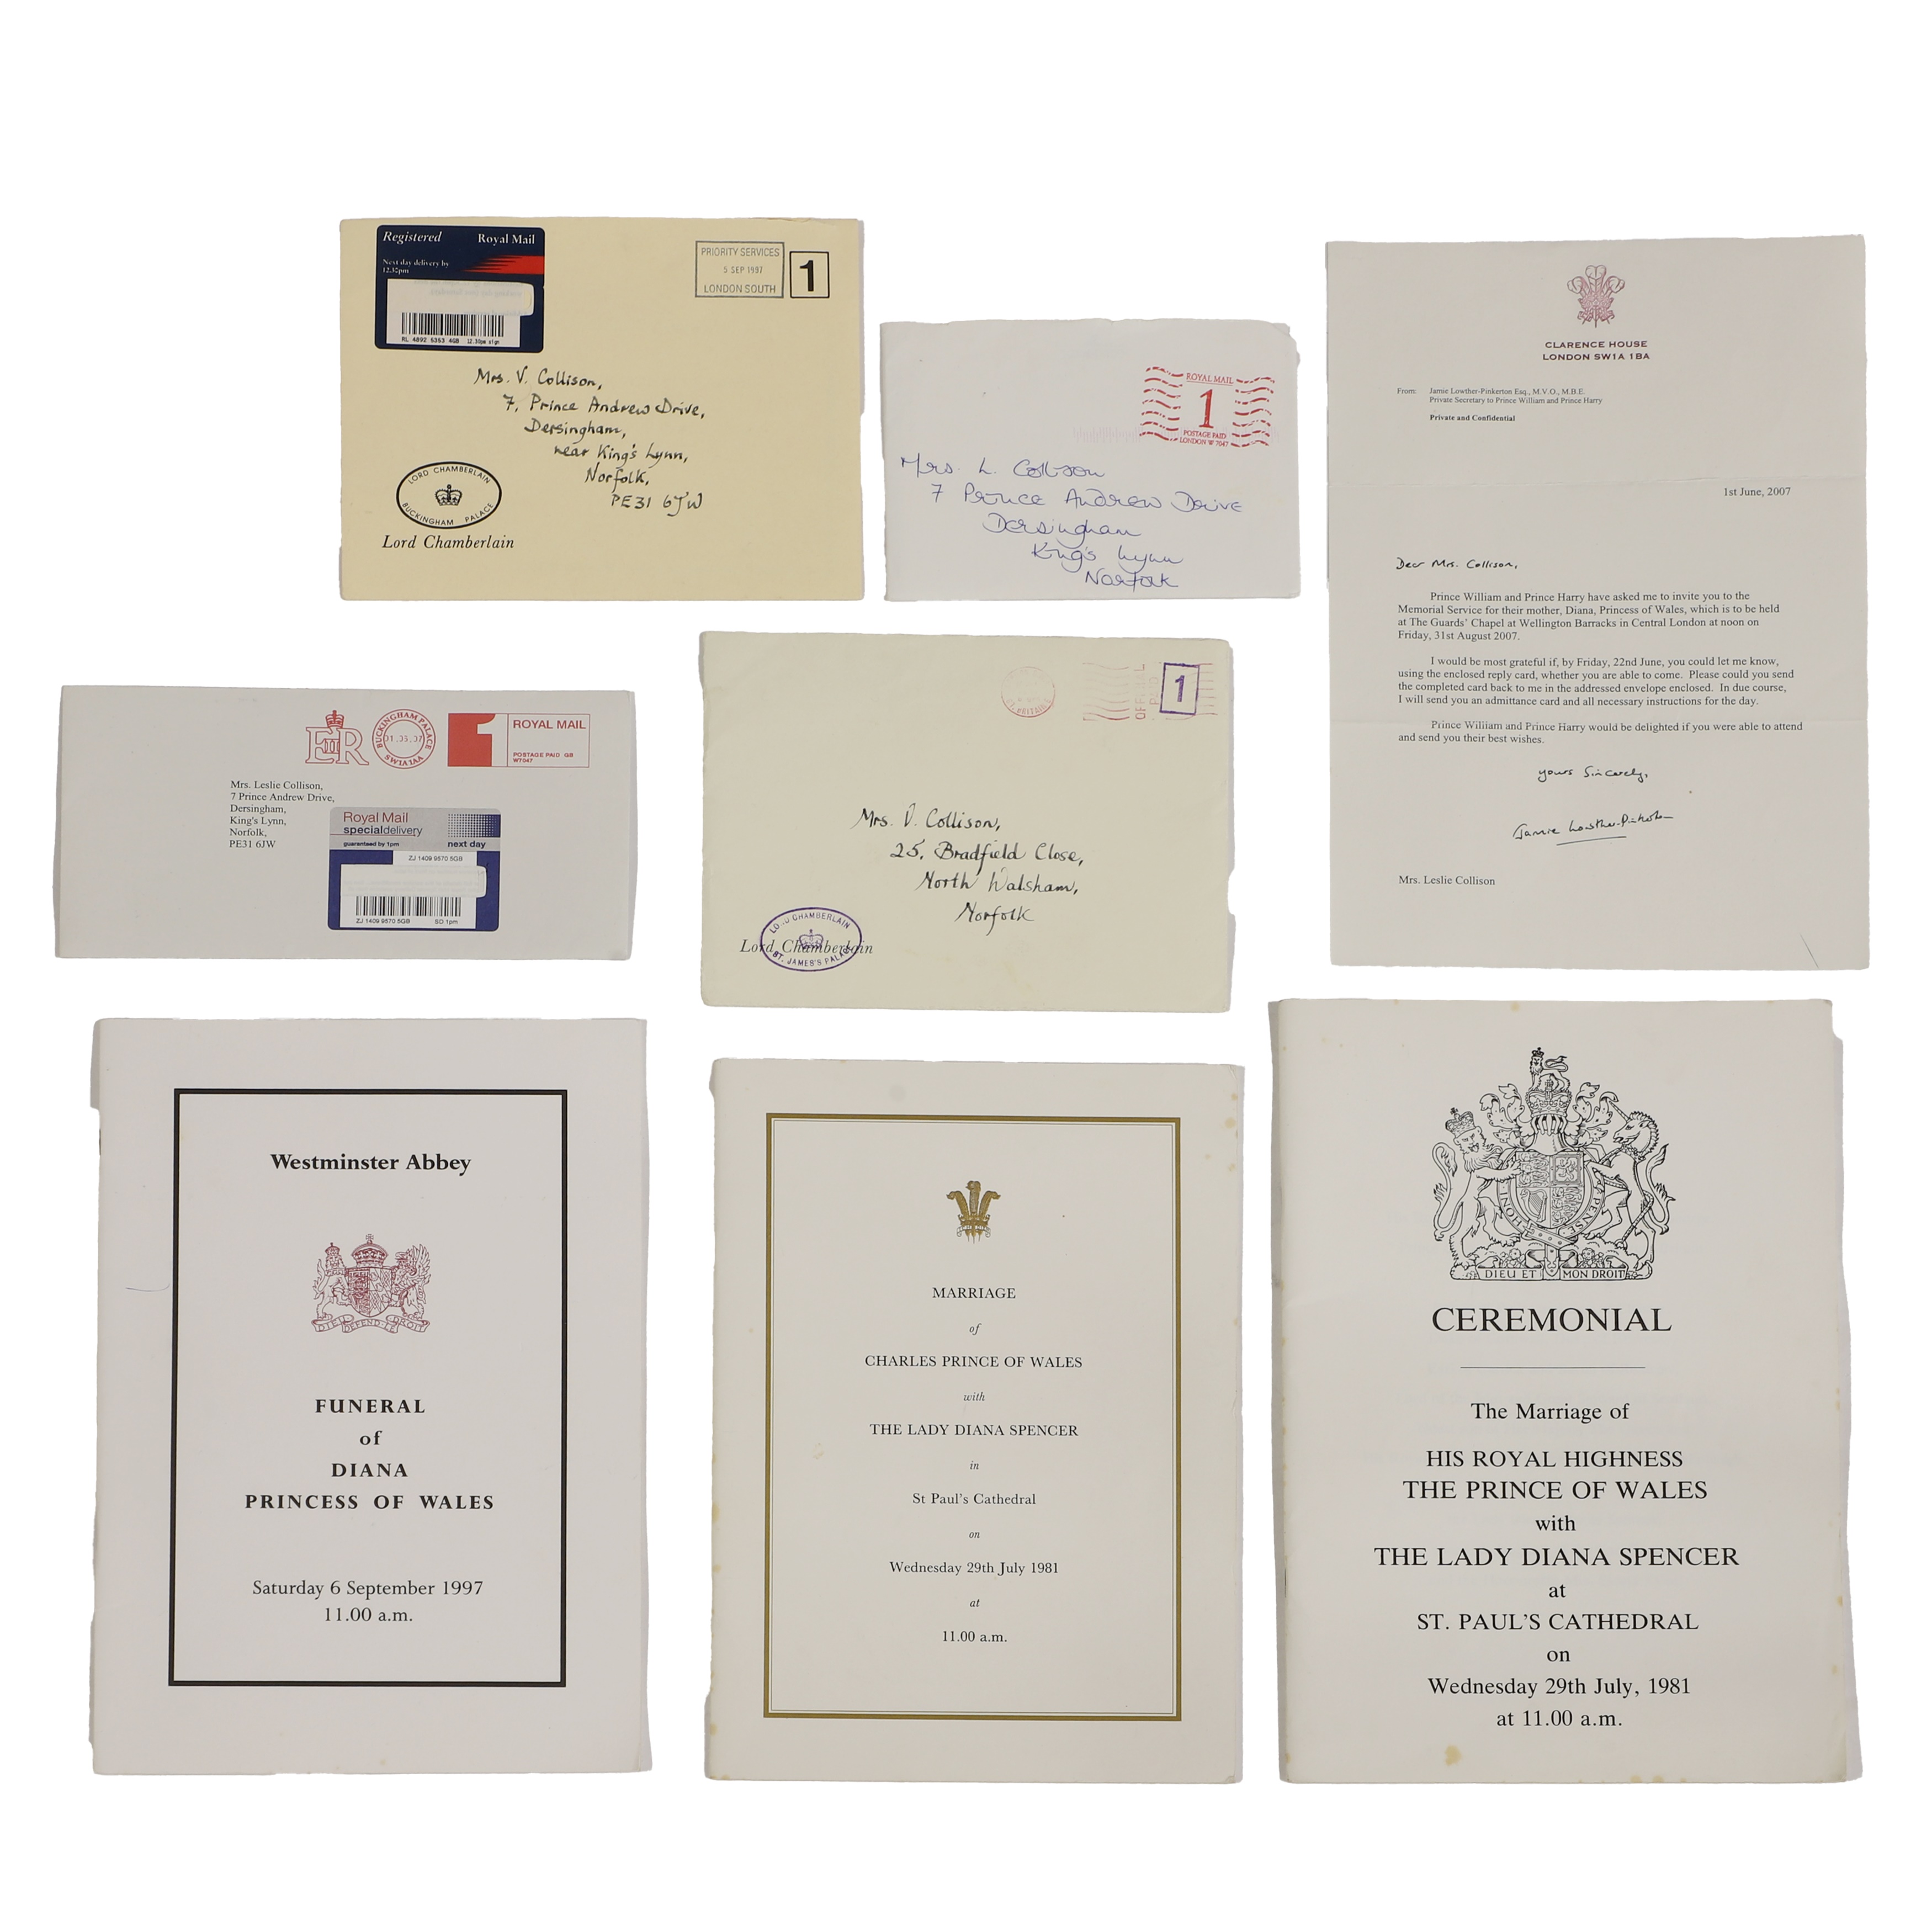 A collection of unseen letters from HRH Diana, Princess of Wales (1961-1997)